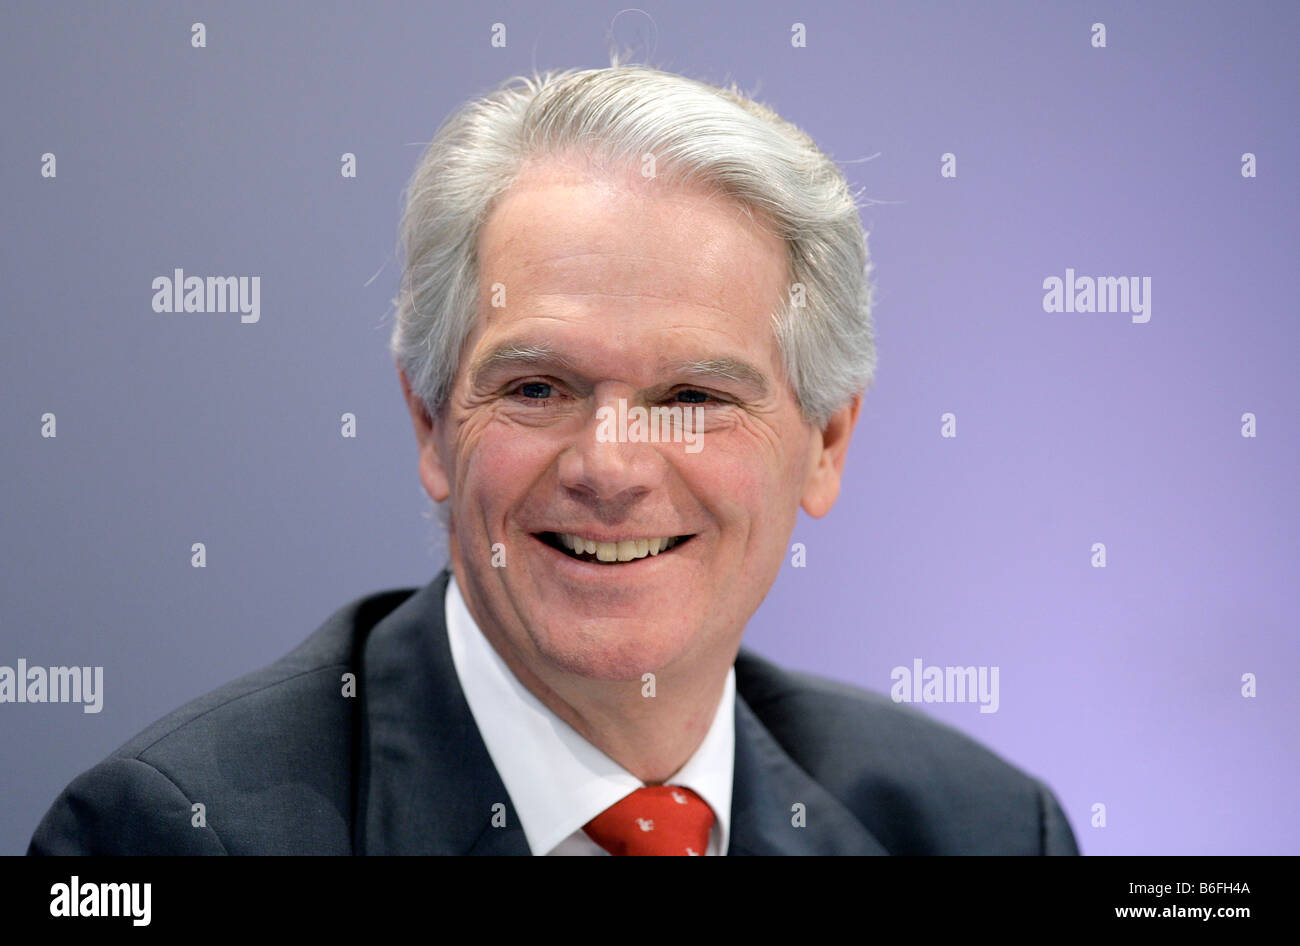 Peter-Alexander Wacker, chief executive officer and designated chairman of the supervisory board of Wacker Chemie AG, during th Stock Photo